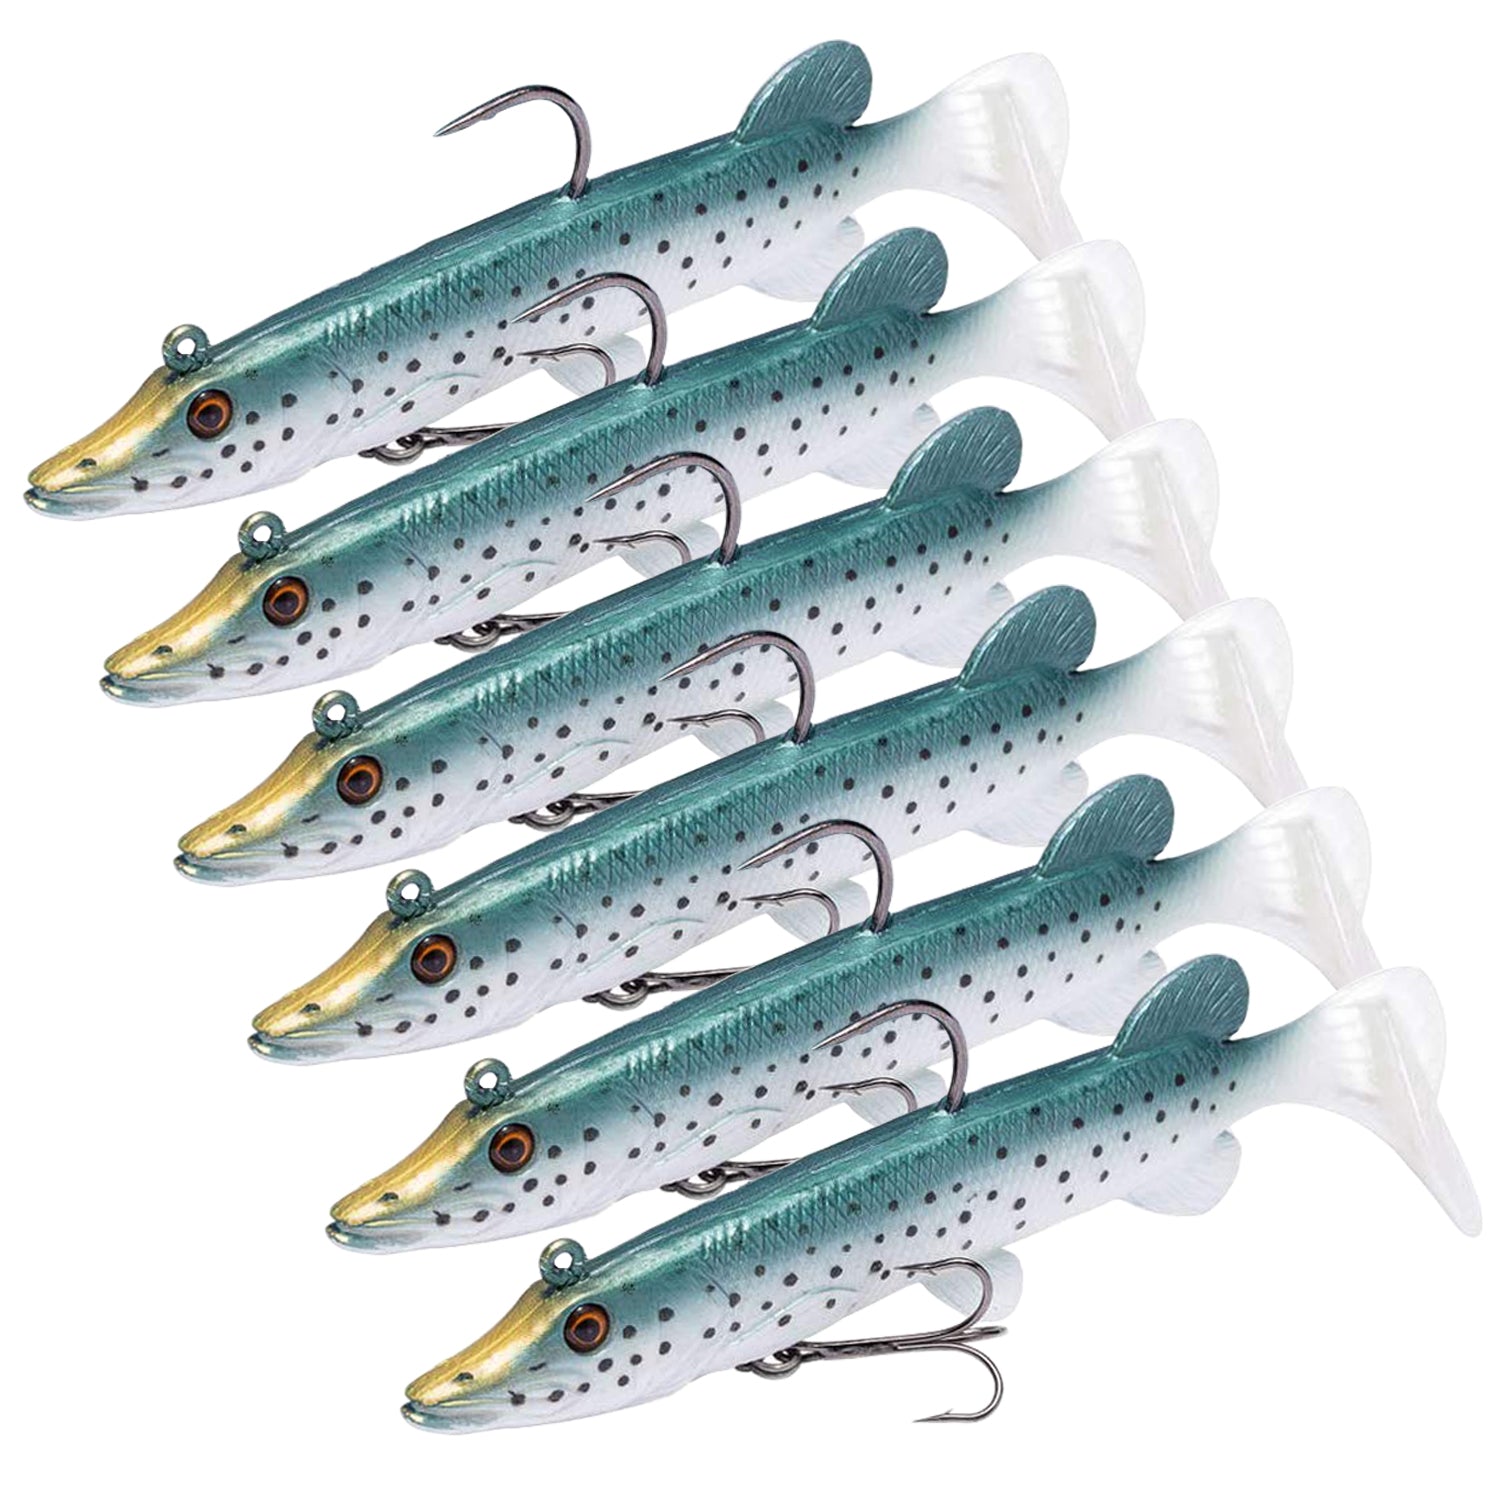 True Pike 5 inch paddle tail swimbait Pack of 6